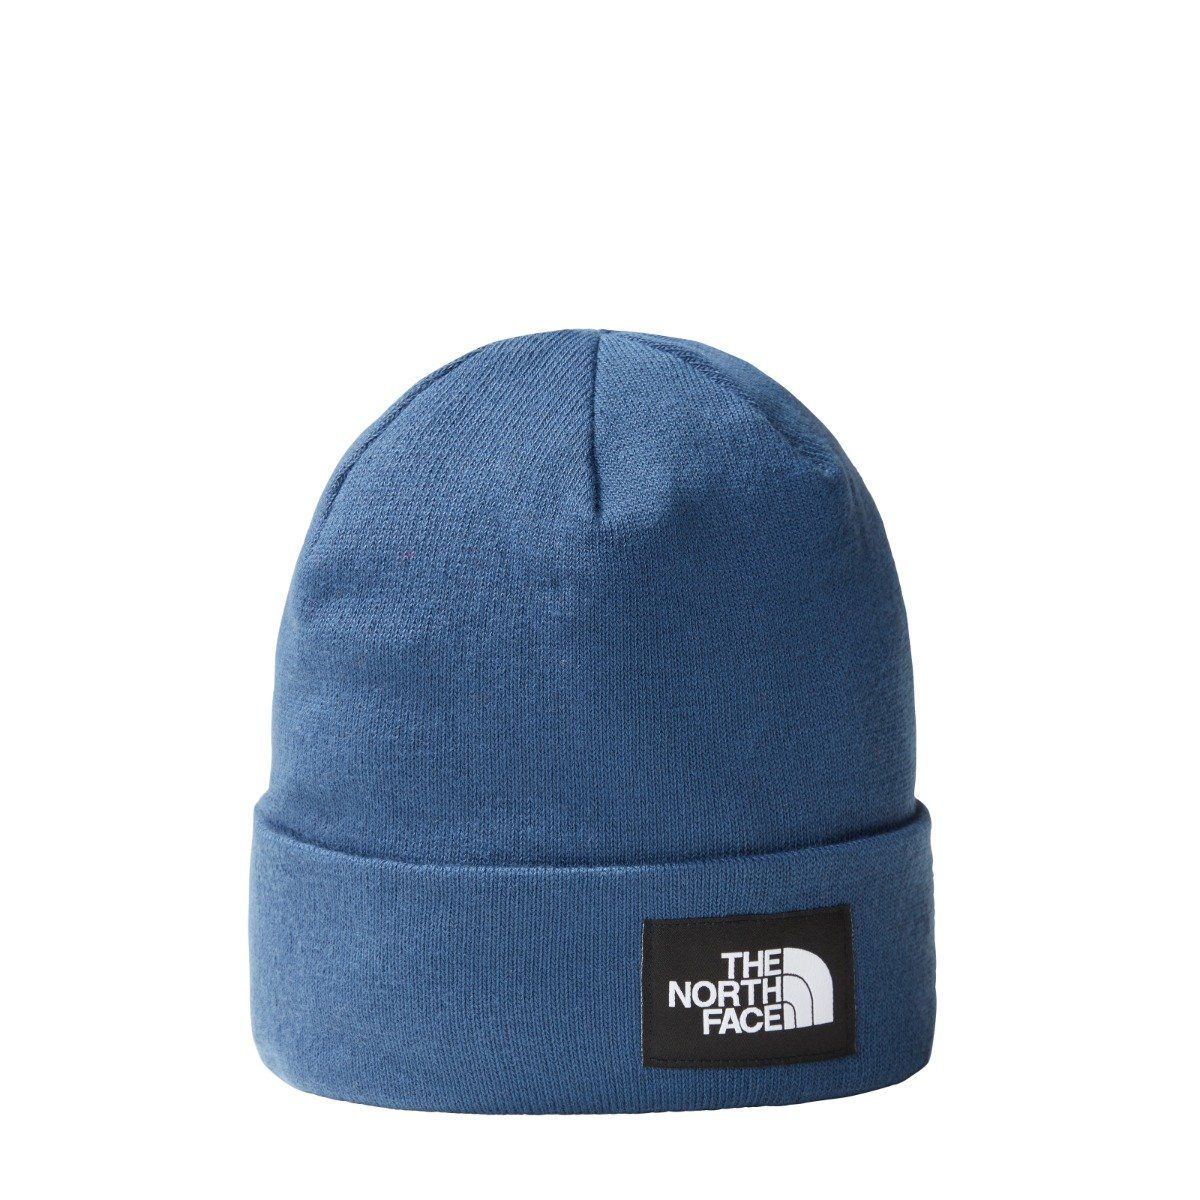 The North Face - DOCK WORKER RECYCLED BEANIE